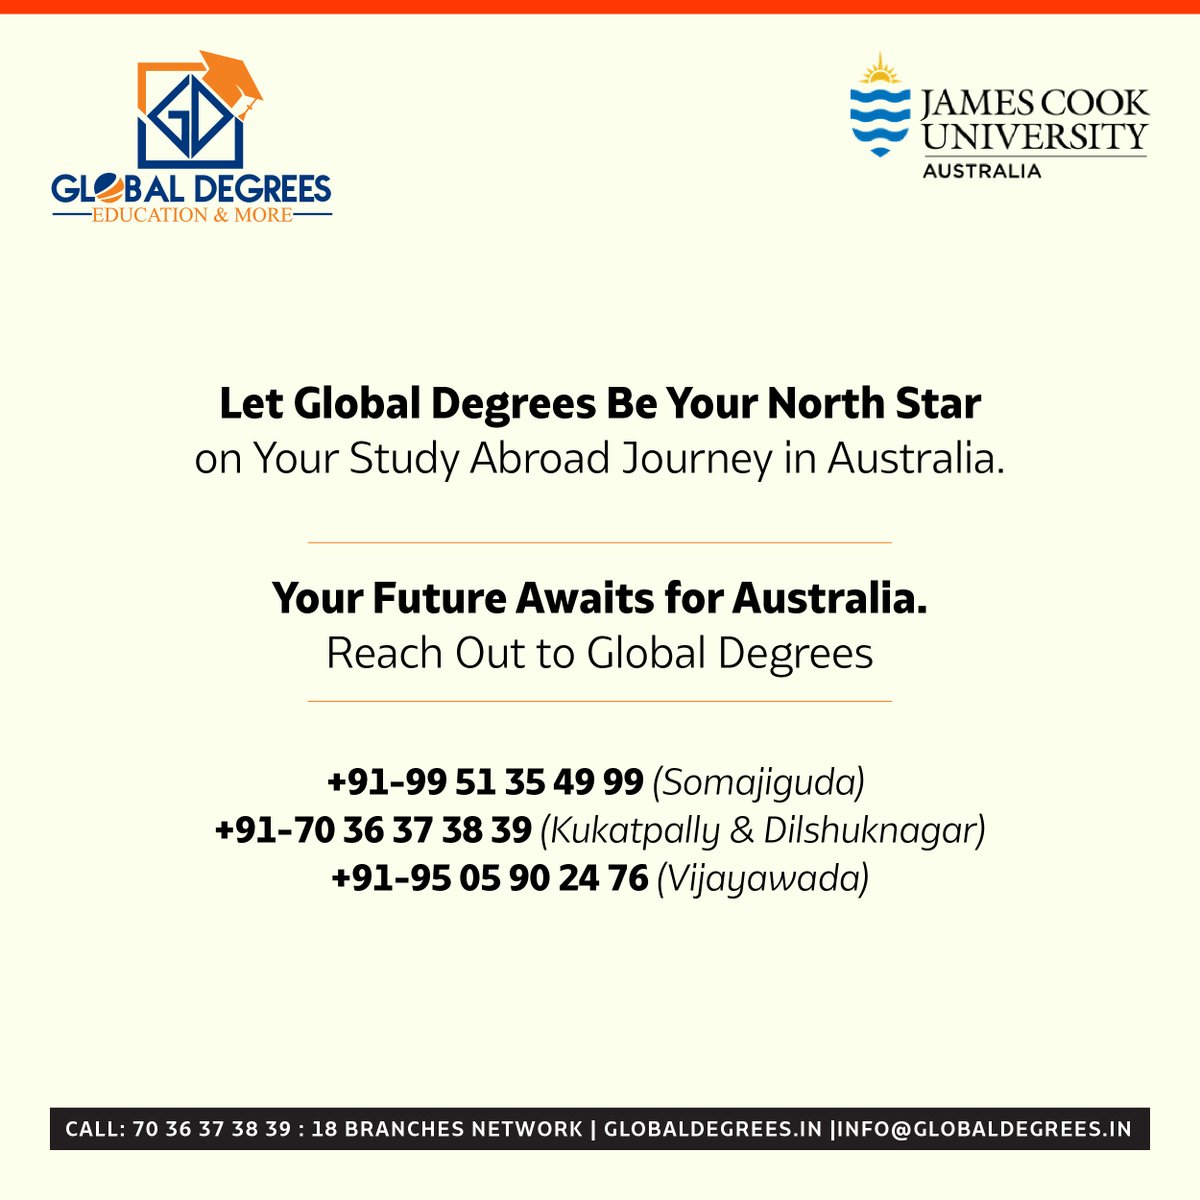 As leading global education advisers, we are committed to providing extensive support for #studyingabroad. 

Enroll at #JamesCookUniversity through our consultant and have access to an exceptional education in Australia. 

Commence your journey towards prosperity now!